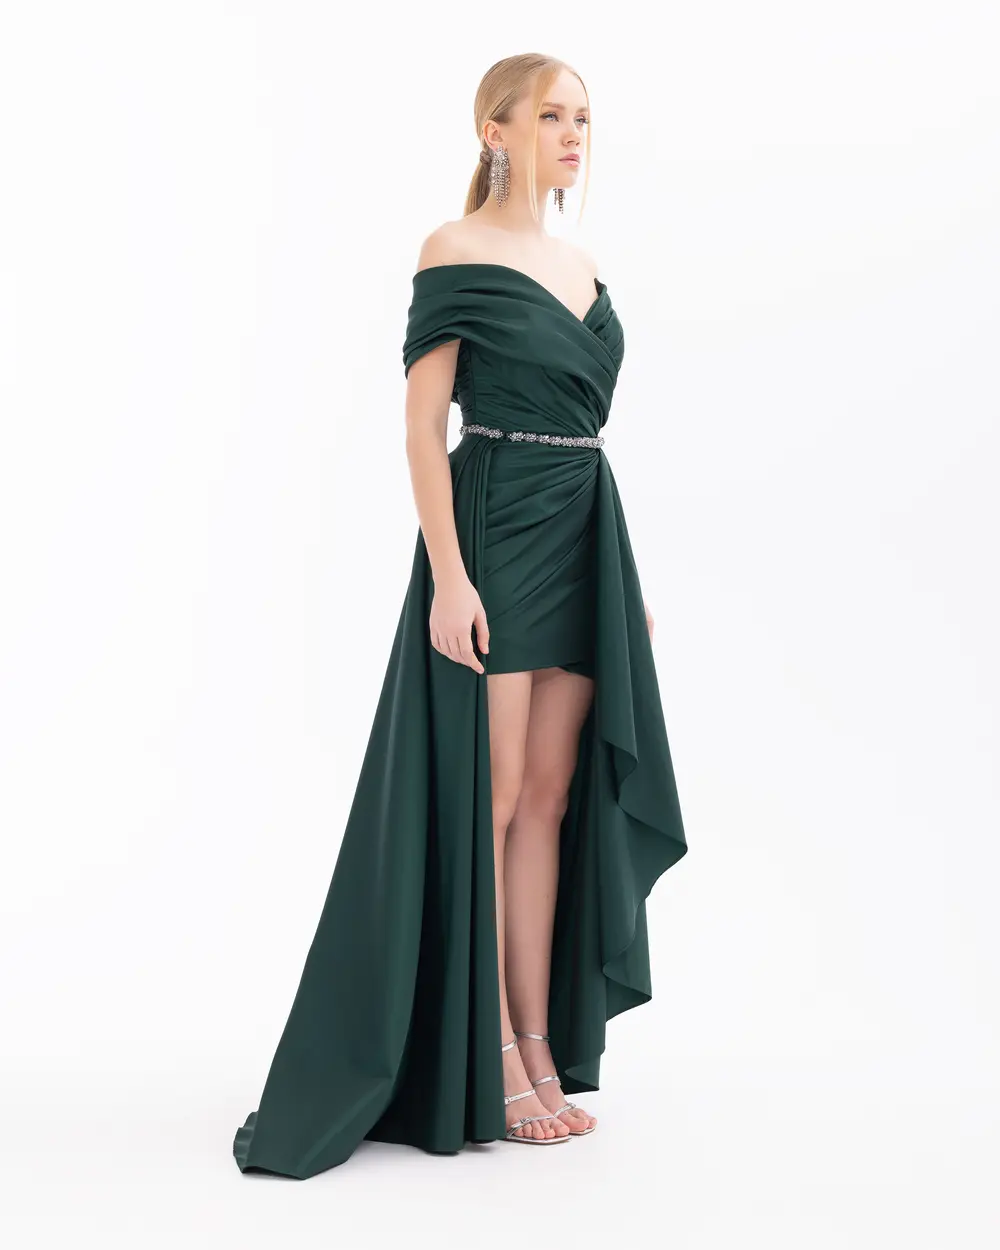 Swallow Neck Evening Dress with Removable Skirt and Belt